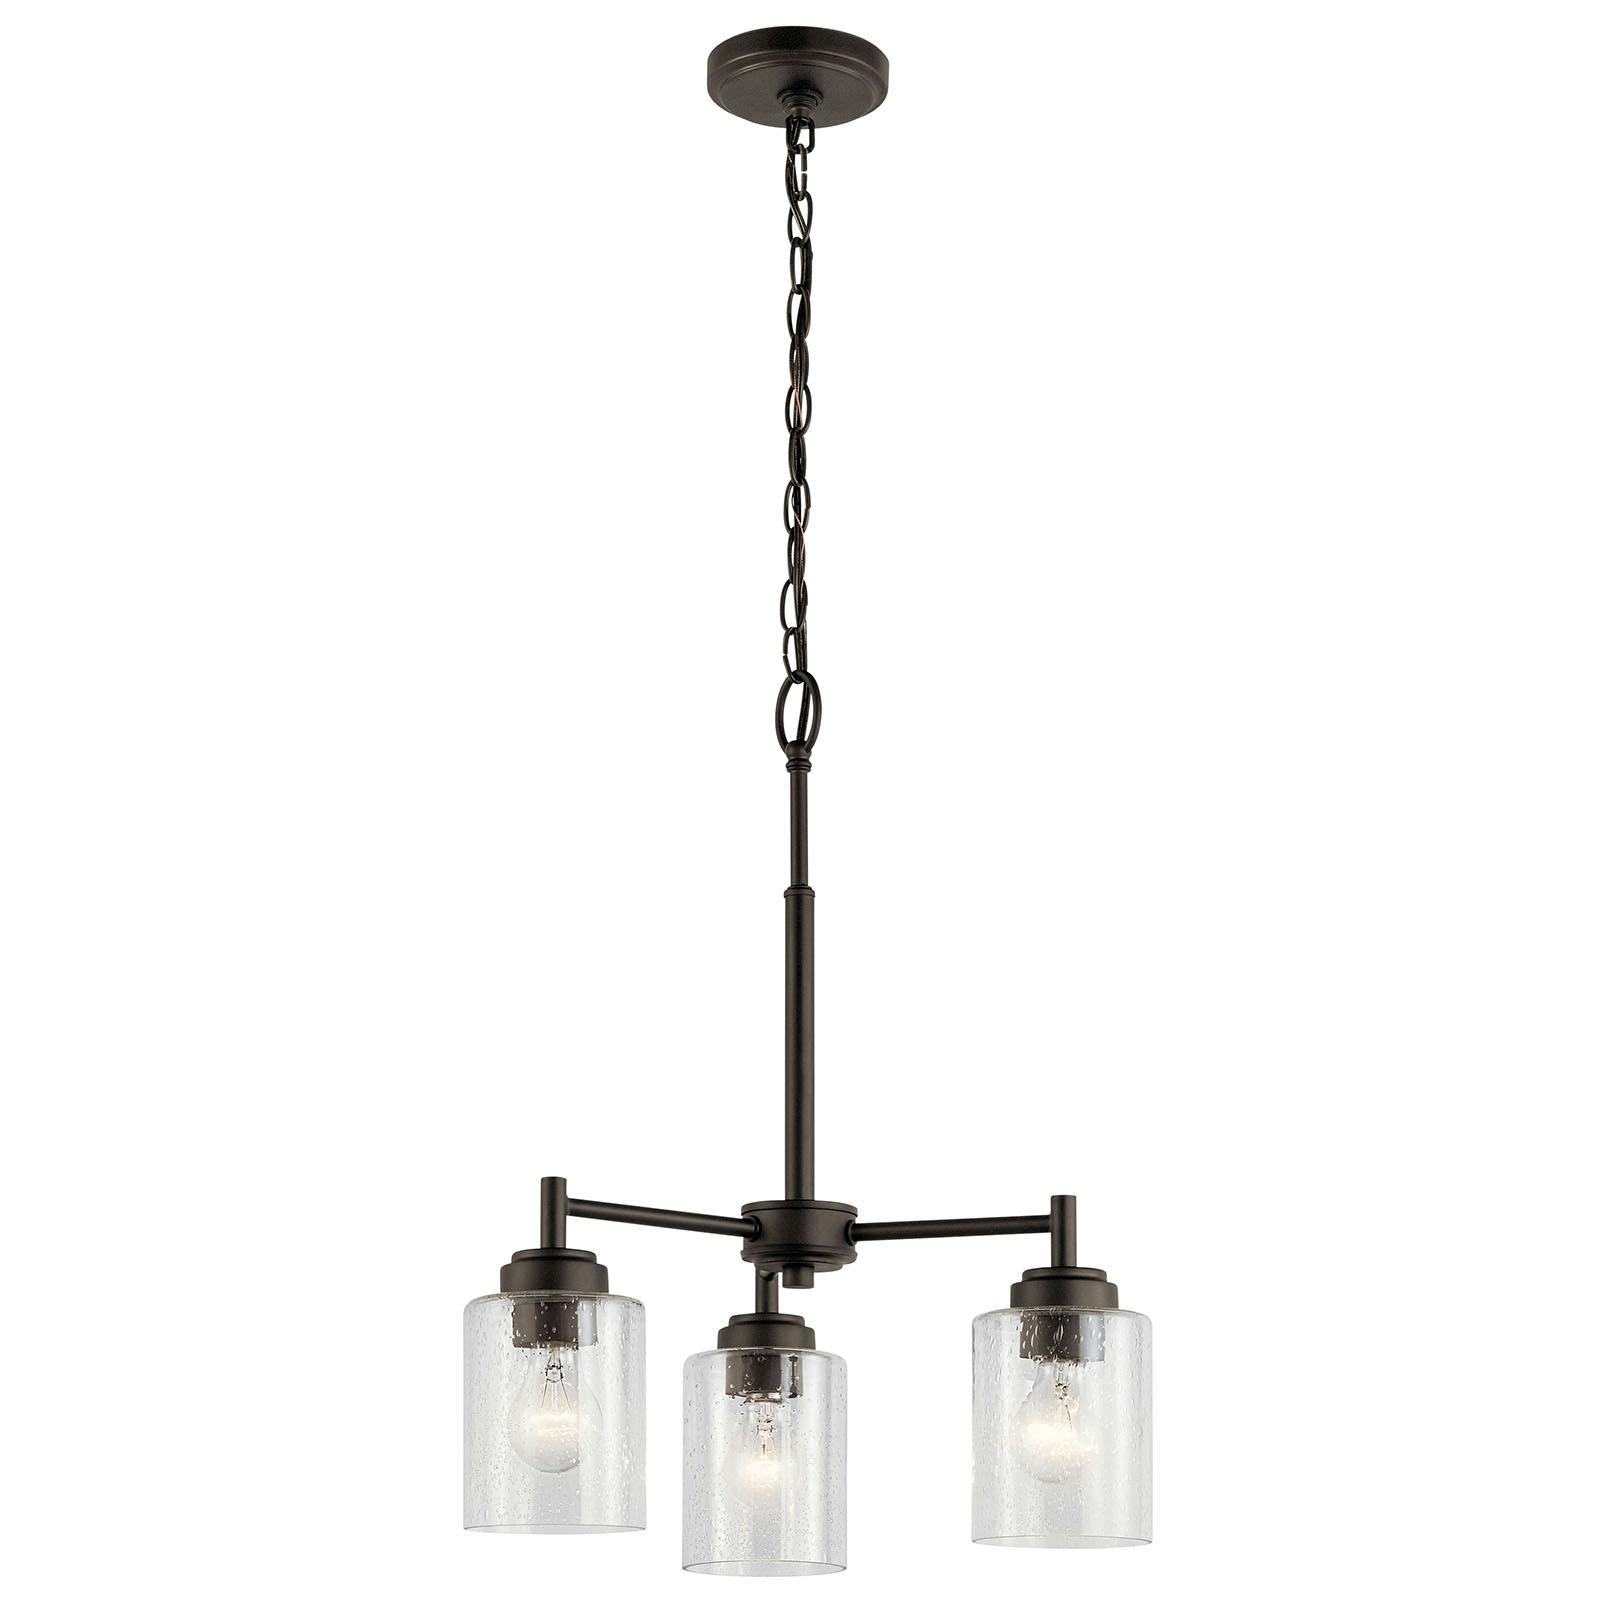 The Winslow 15.25"Mini Chandelier Olde Bronze facing down on a white background